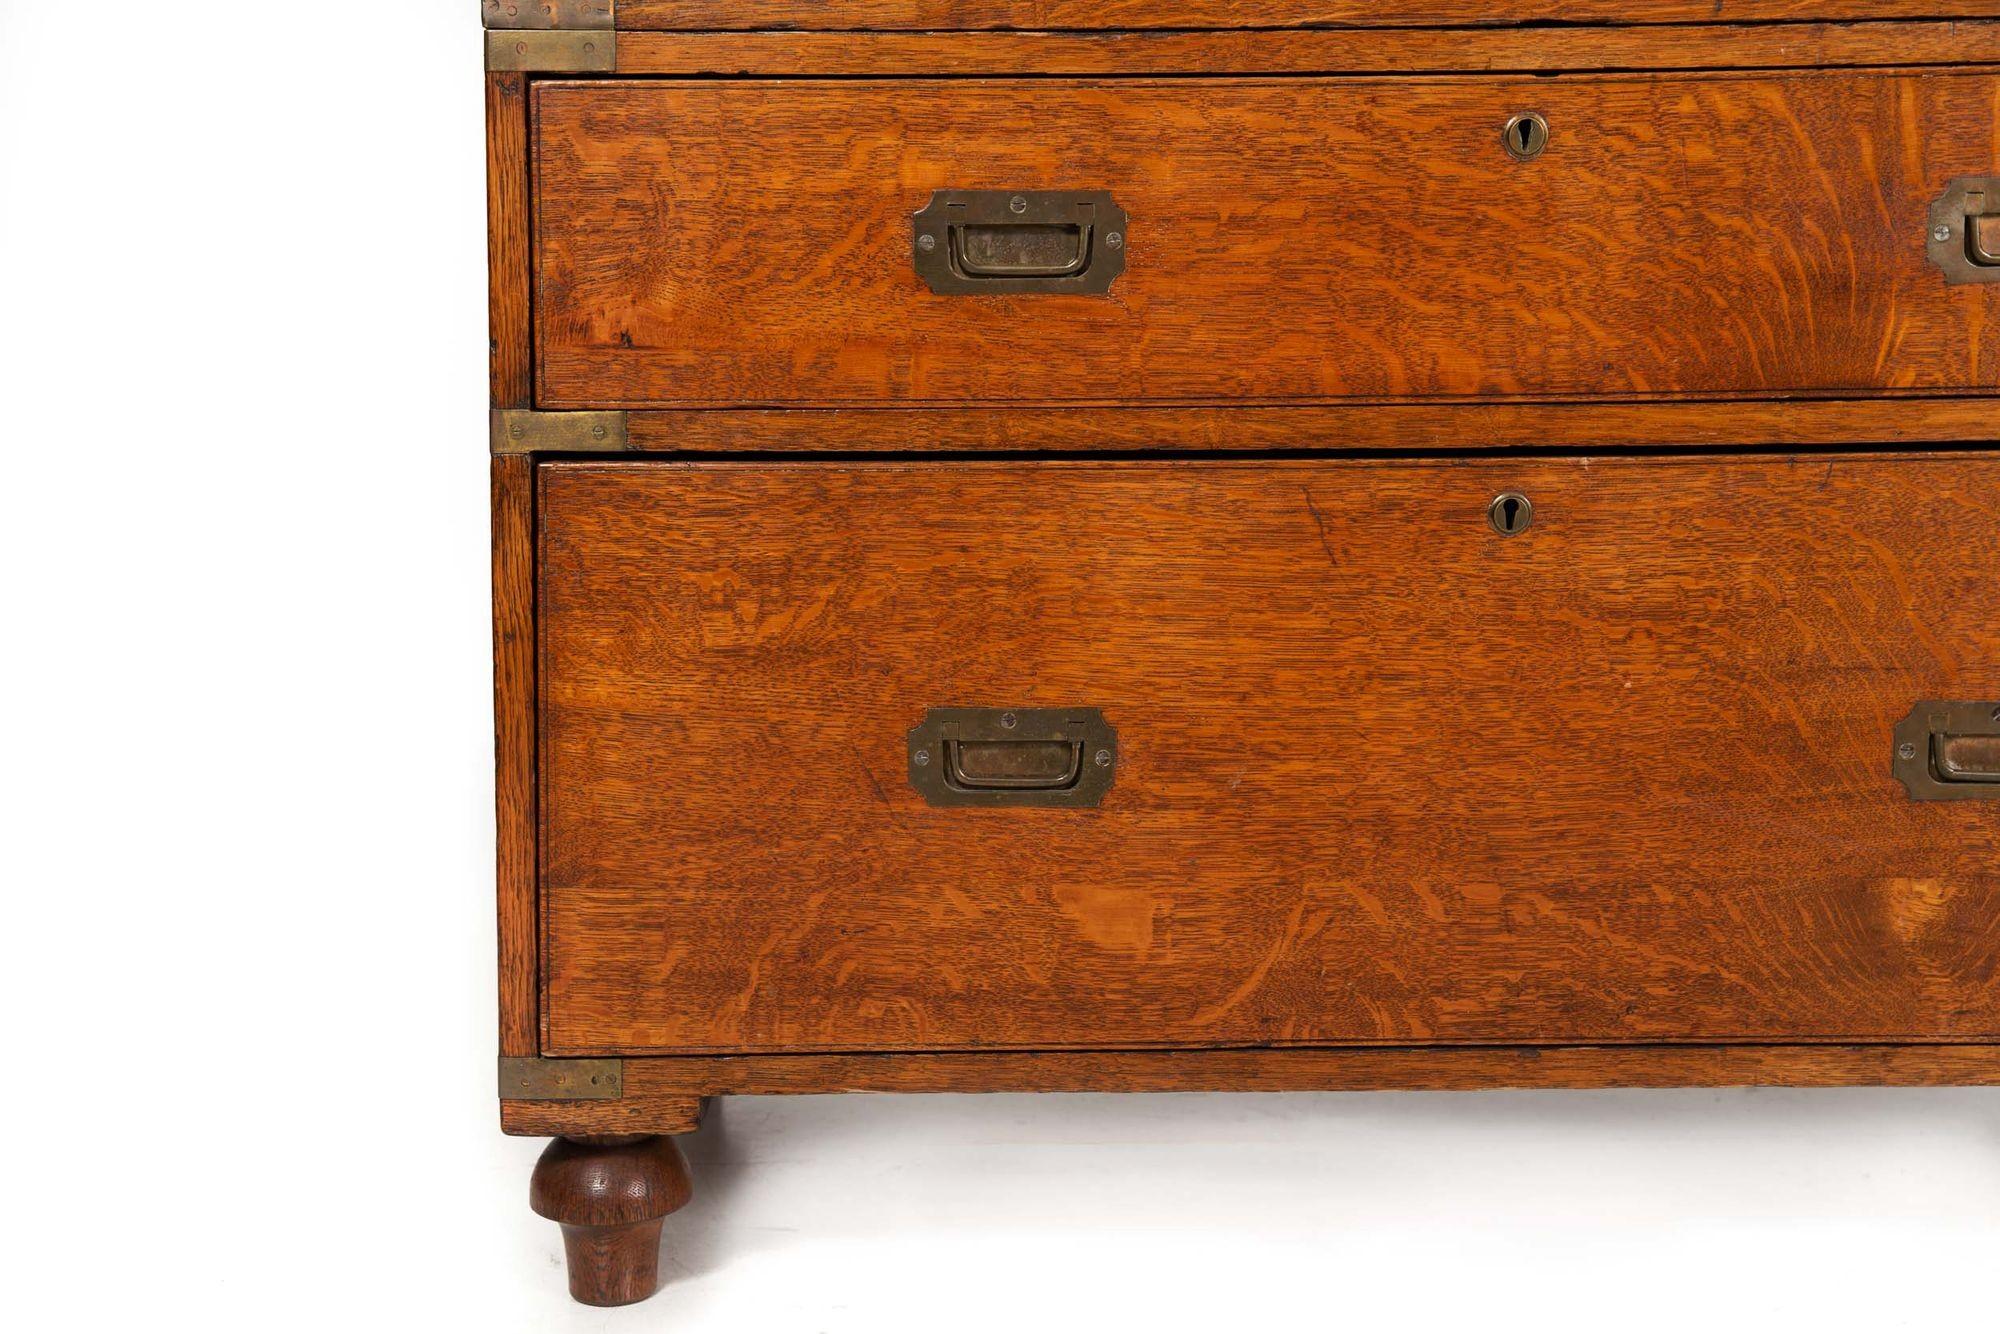 British Antique Campaign Chest of Drawers with Desk, 19th Century 3